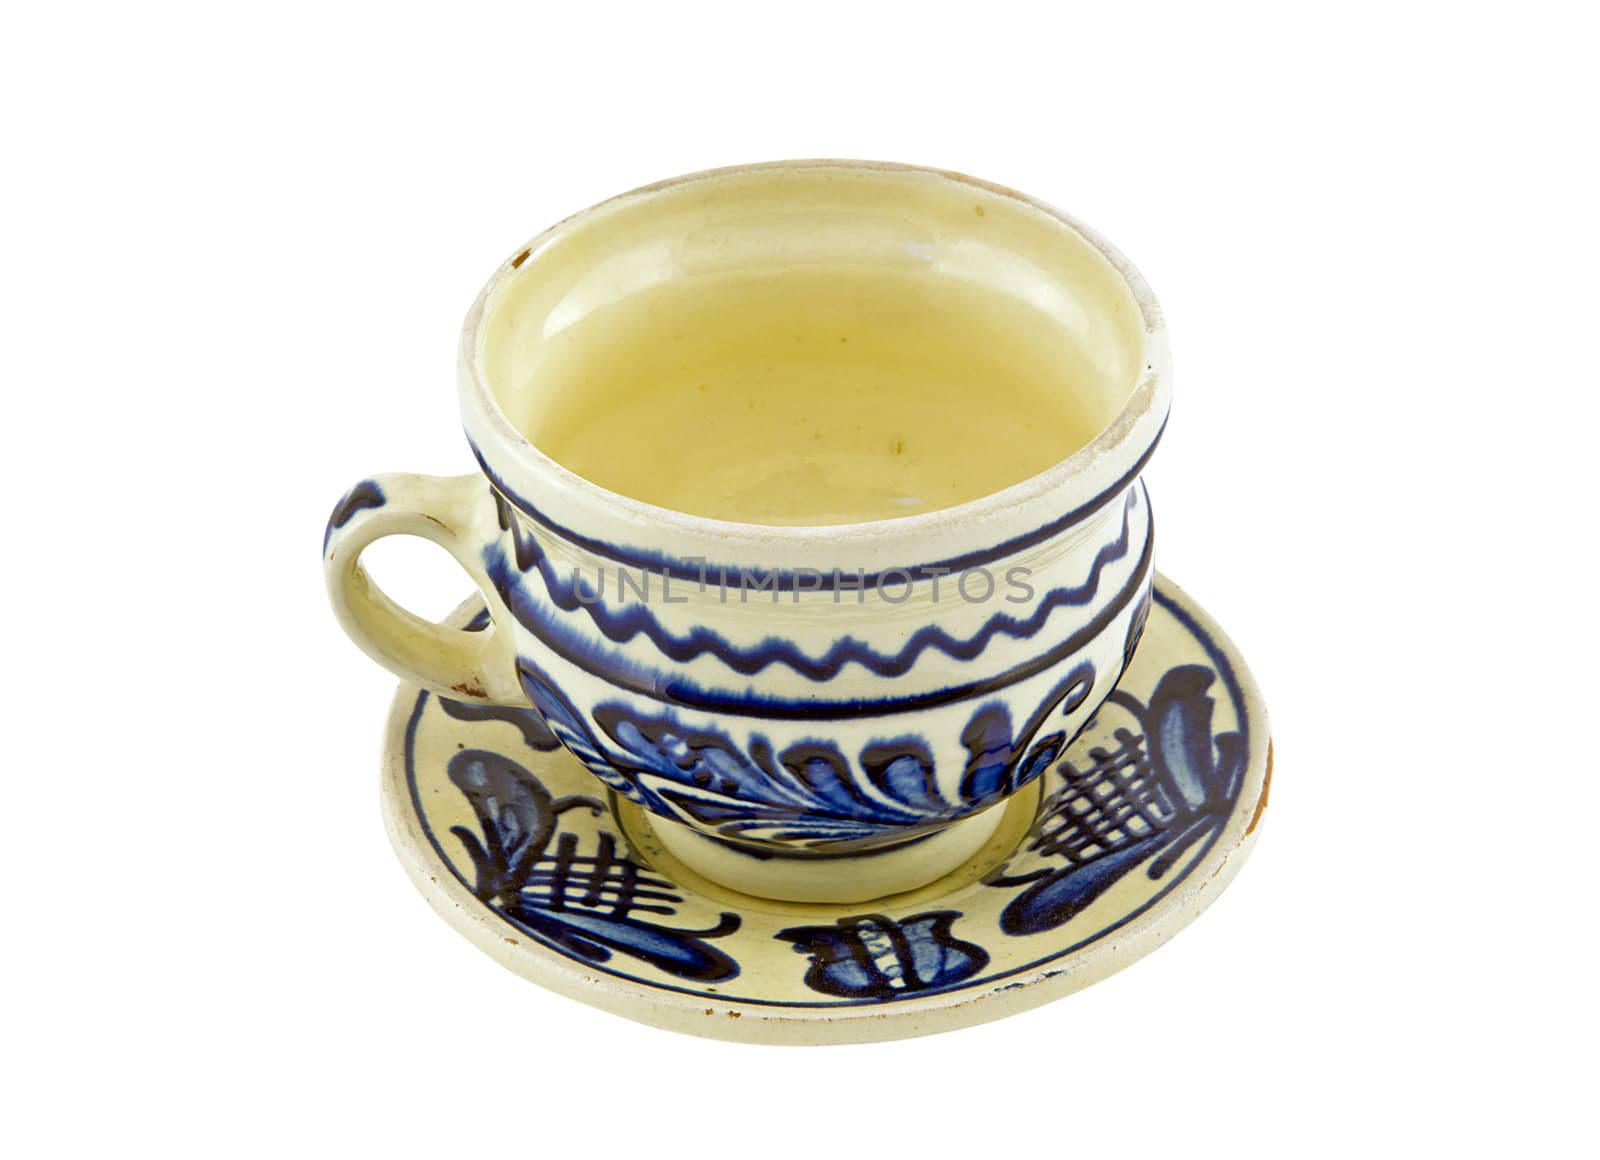 Painted pottery cup with typical Transylvanian patterns